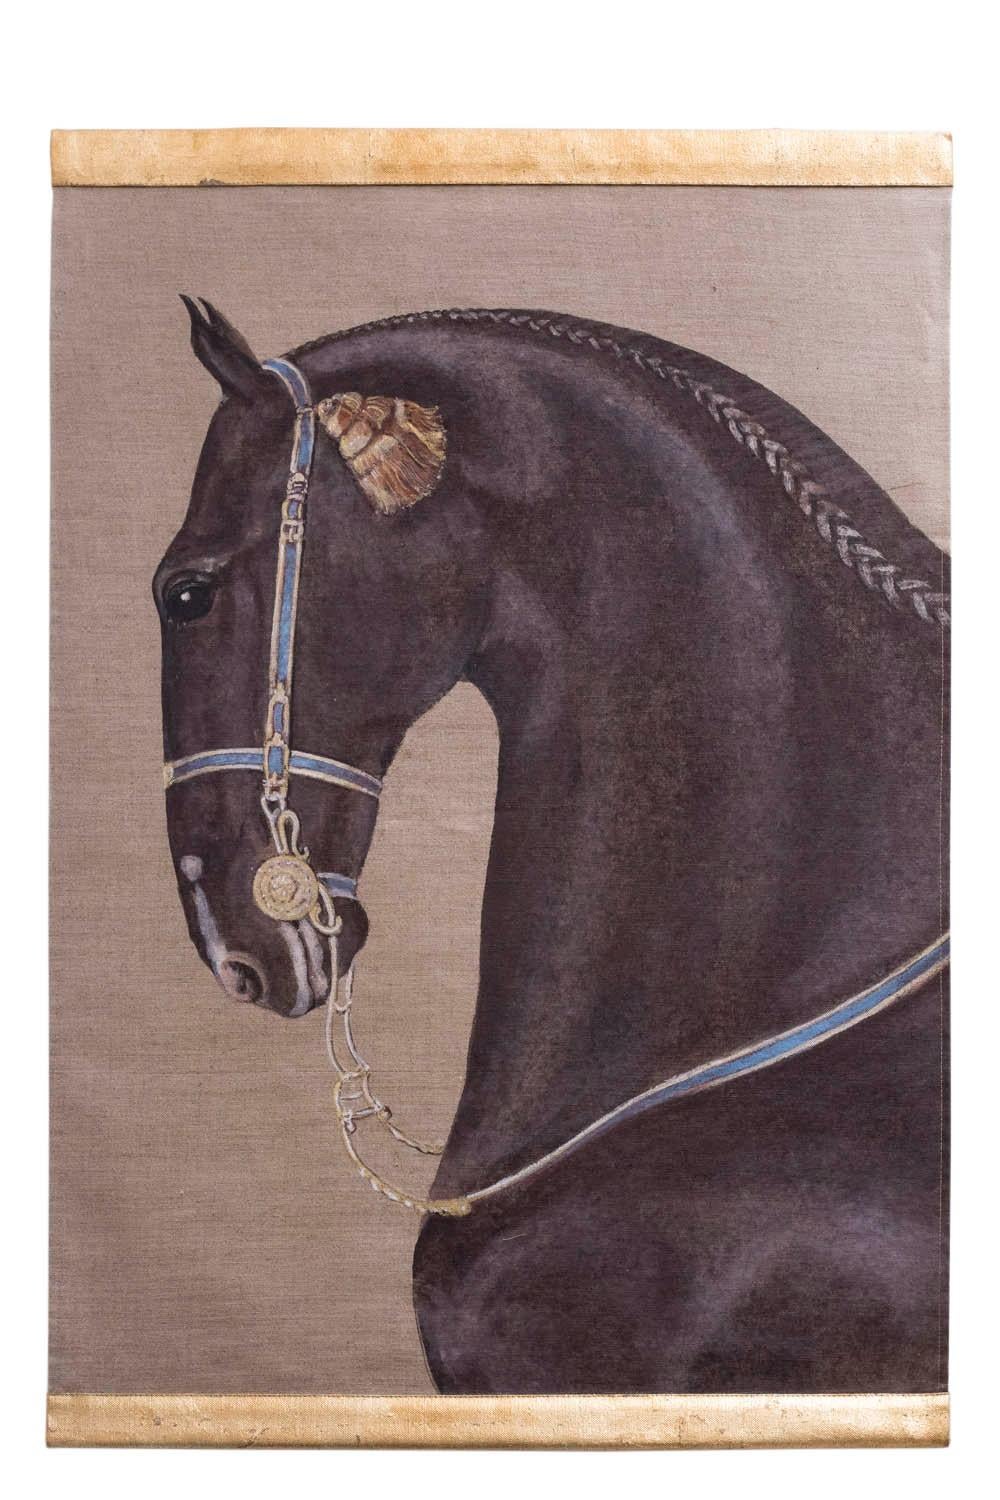 Painted canvas figuring a side view black horse head. Its hairs are braided and it wears a blue harness adorned with a yellow pompom. Brown background.

Linen raw canvas hand painted with natural pigments and background gilt with copper leaf.